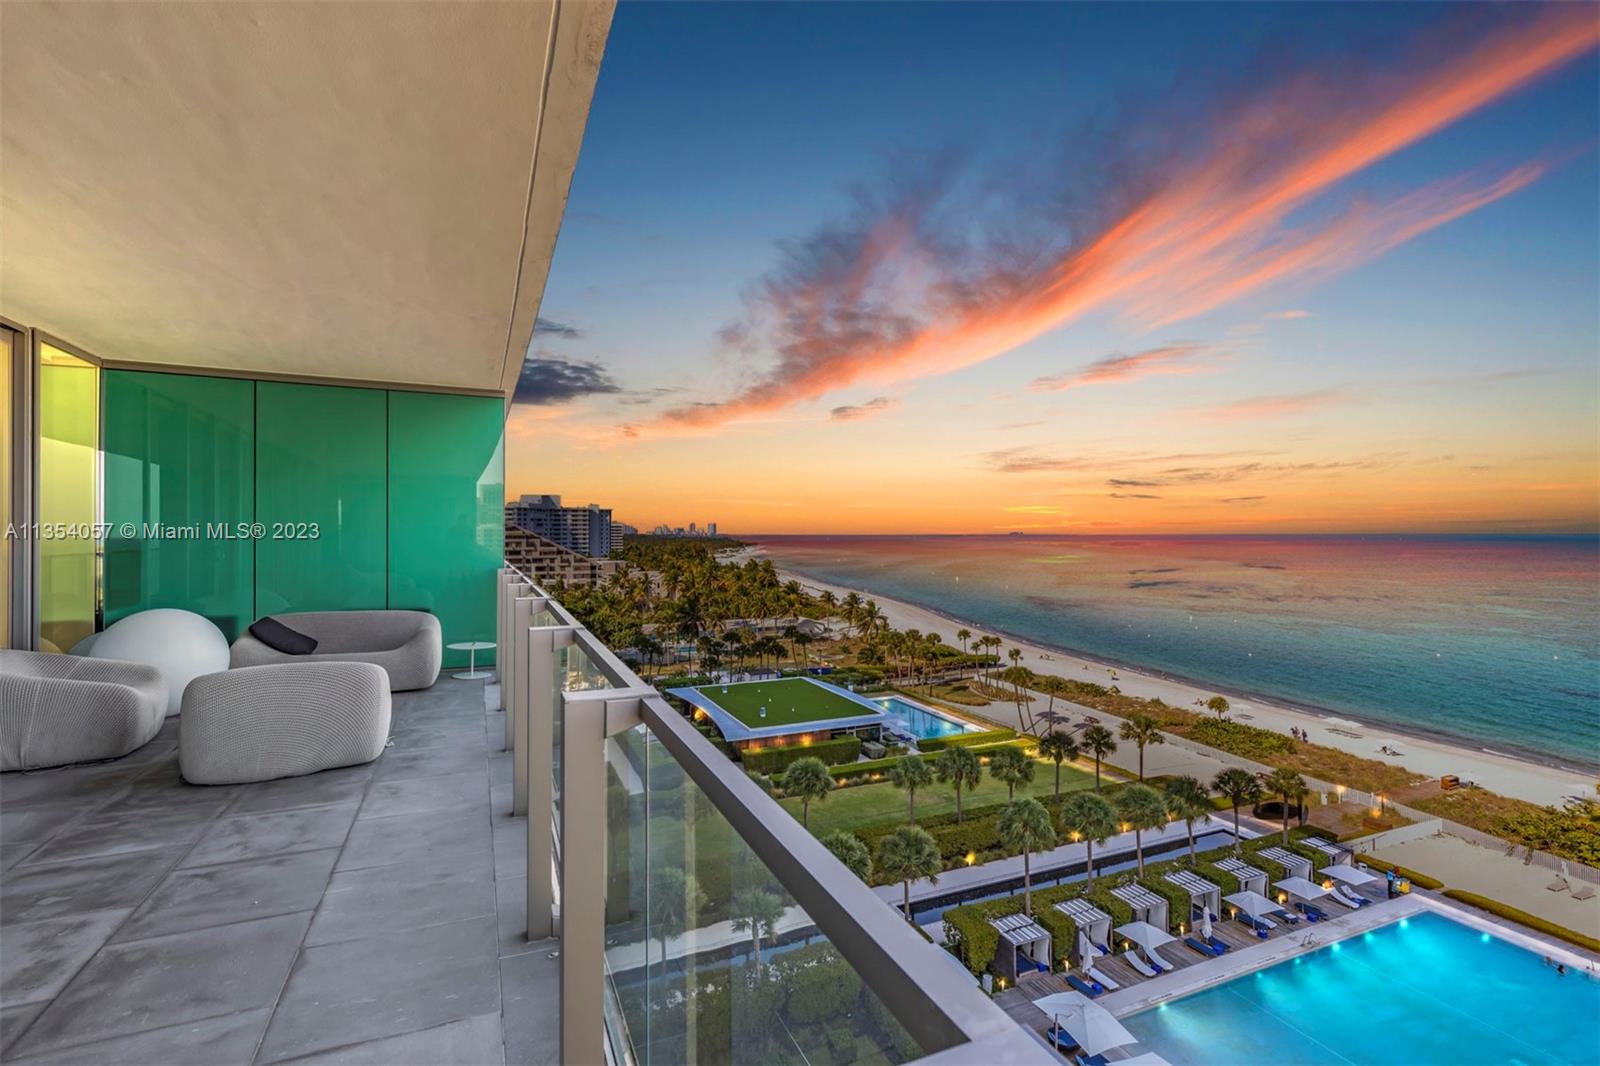 At OCEANA-KEY BISCAYNE you will enjoy the luxurious beach and sea lifestyle while being close to vibrant Miami, South Beach, Wynwood, Design District. This is a beautiful beachfront condo designed by architect and superyacht designer, Ramon Alonso of RADYCA studio fame, to incorporate the newest and most innovative as well as sustainable material. Nabuk Italian leather, open grain wood, natural stone, metal panels and reflective glass surfaces, Truly a work of art!